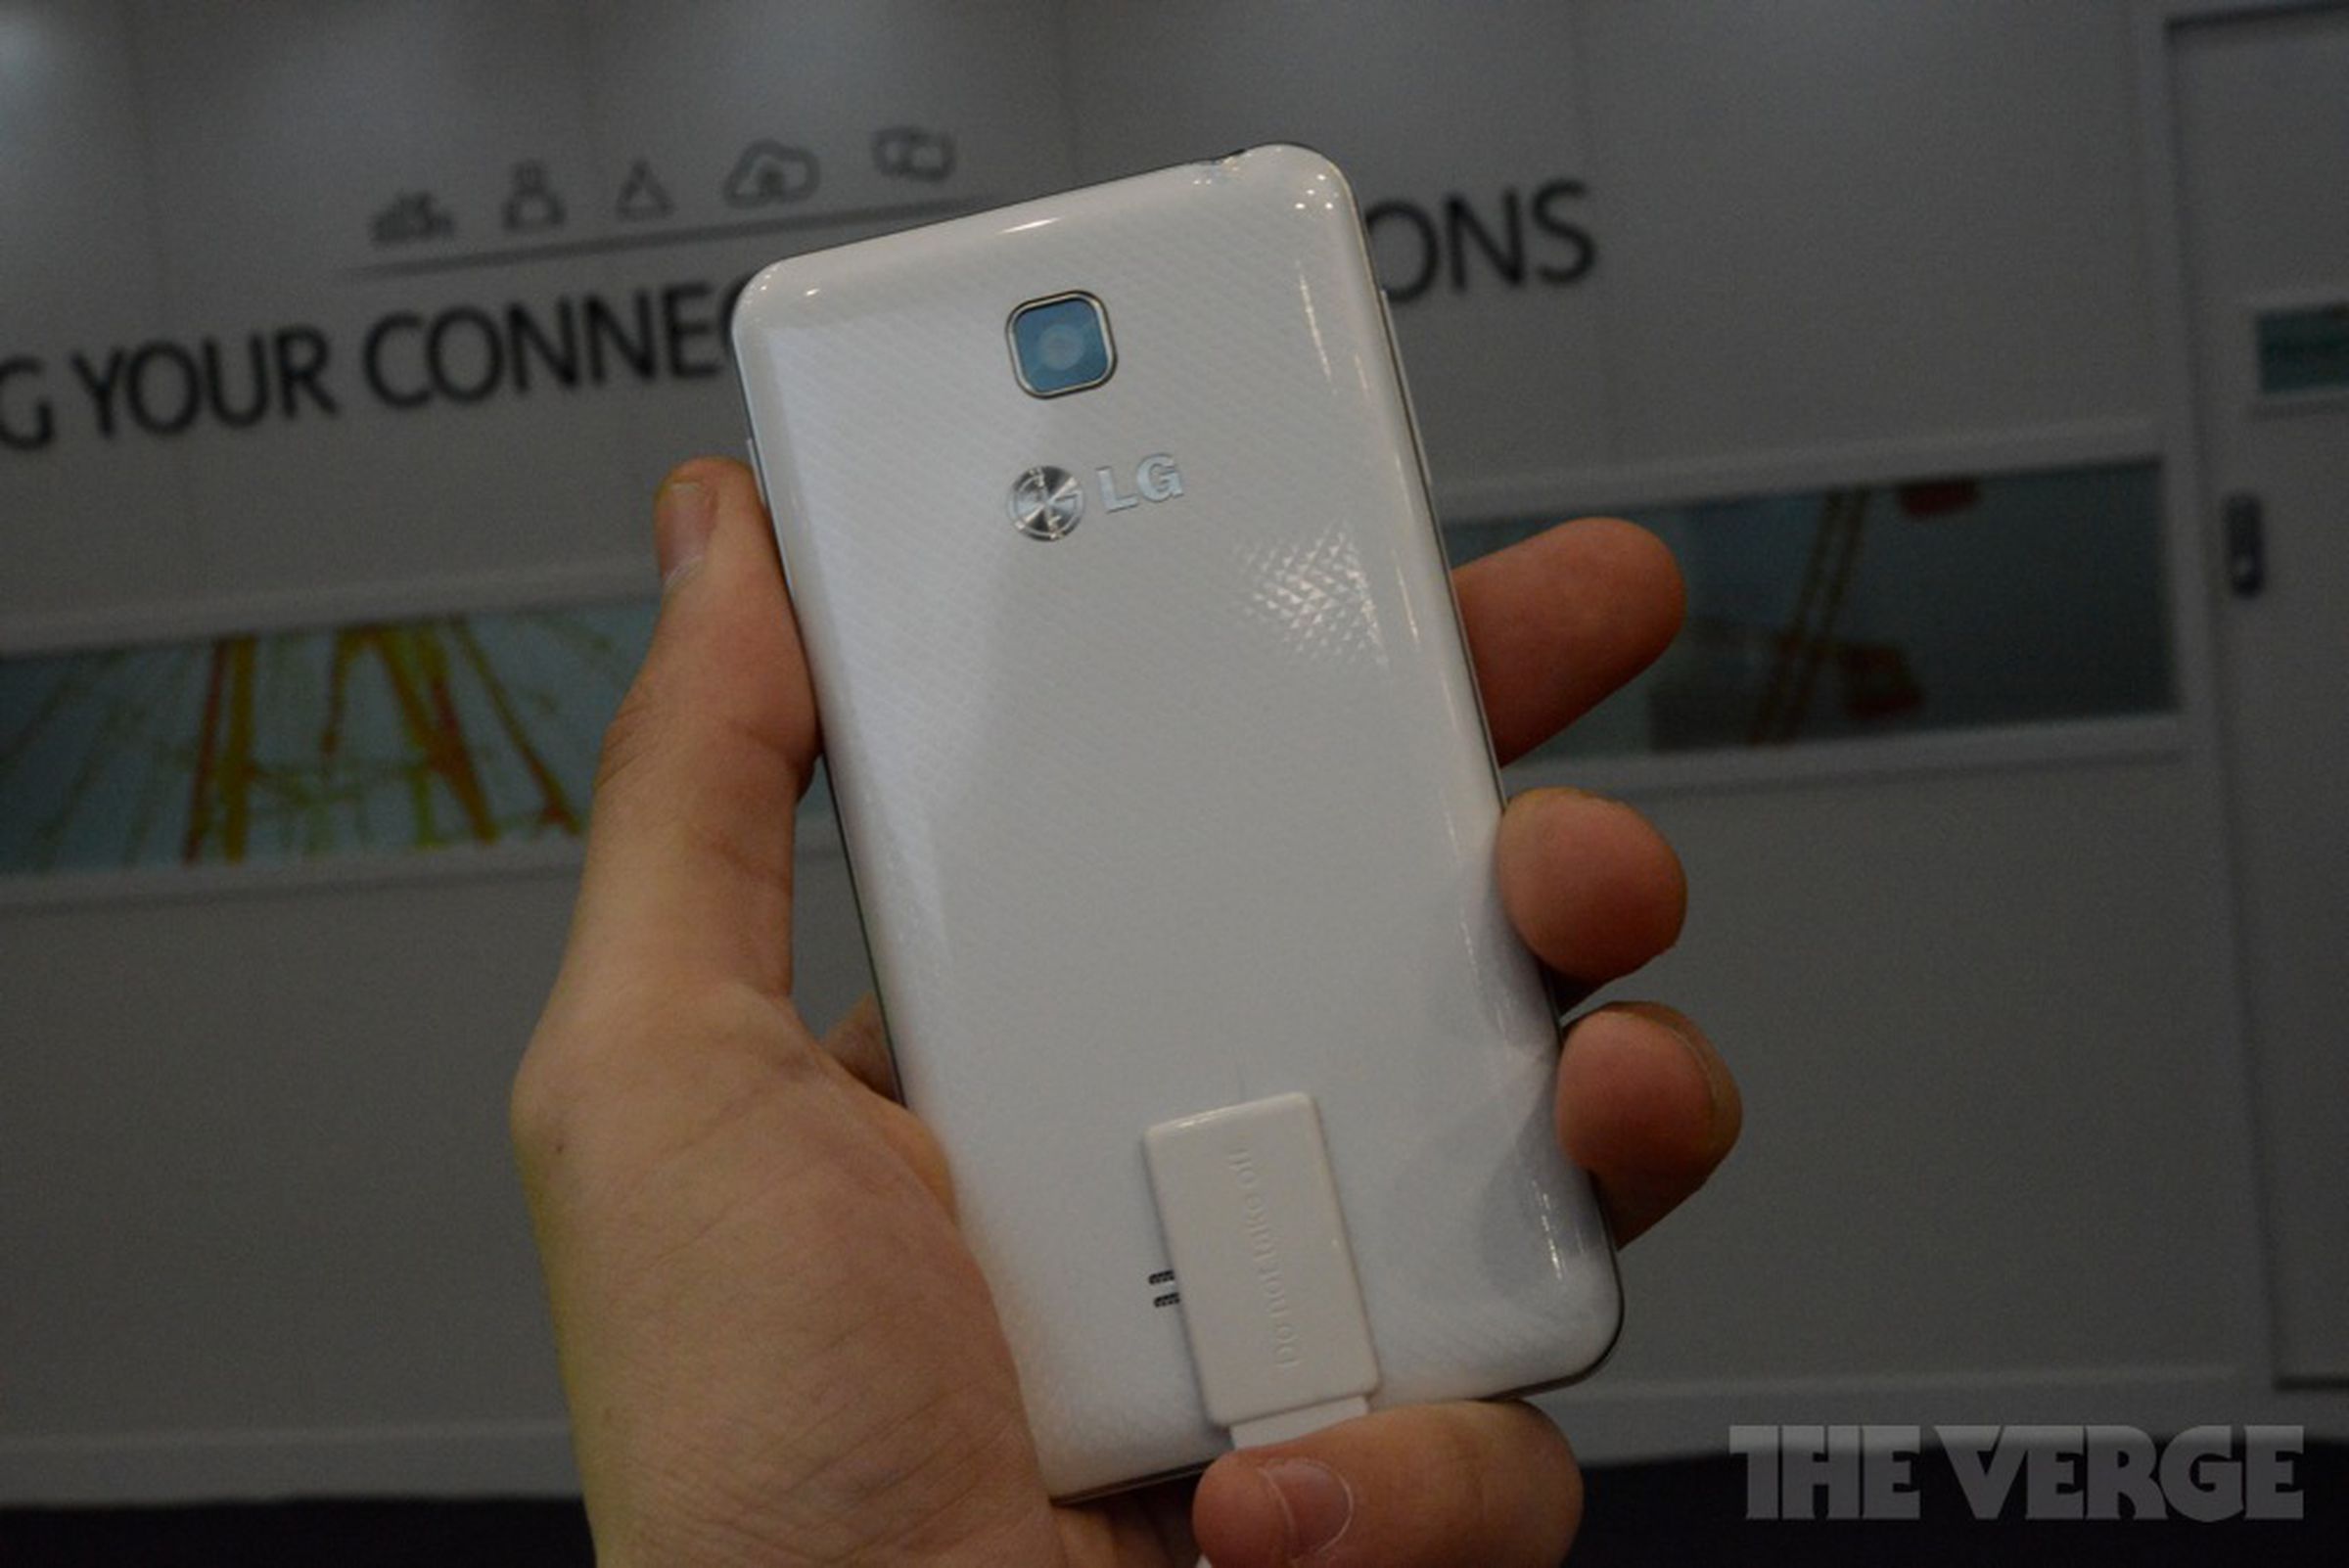 LG Optimus F5 hands-on pictures